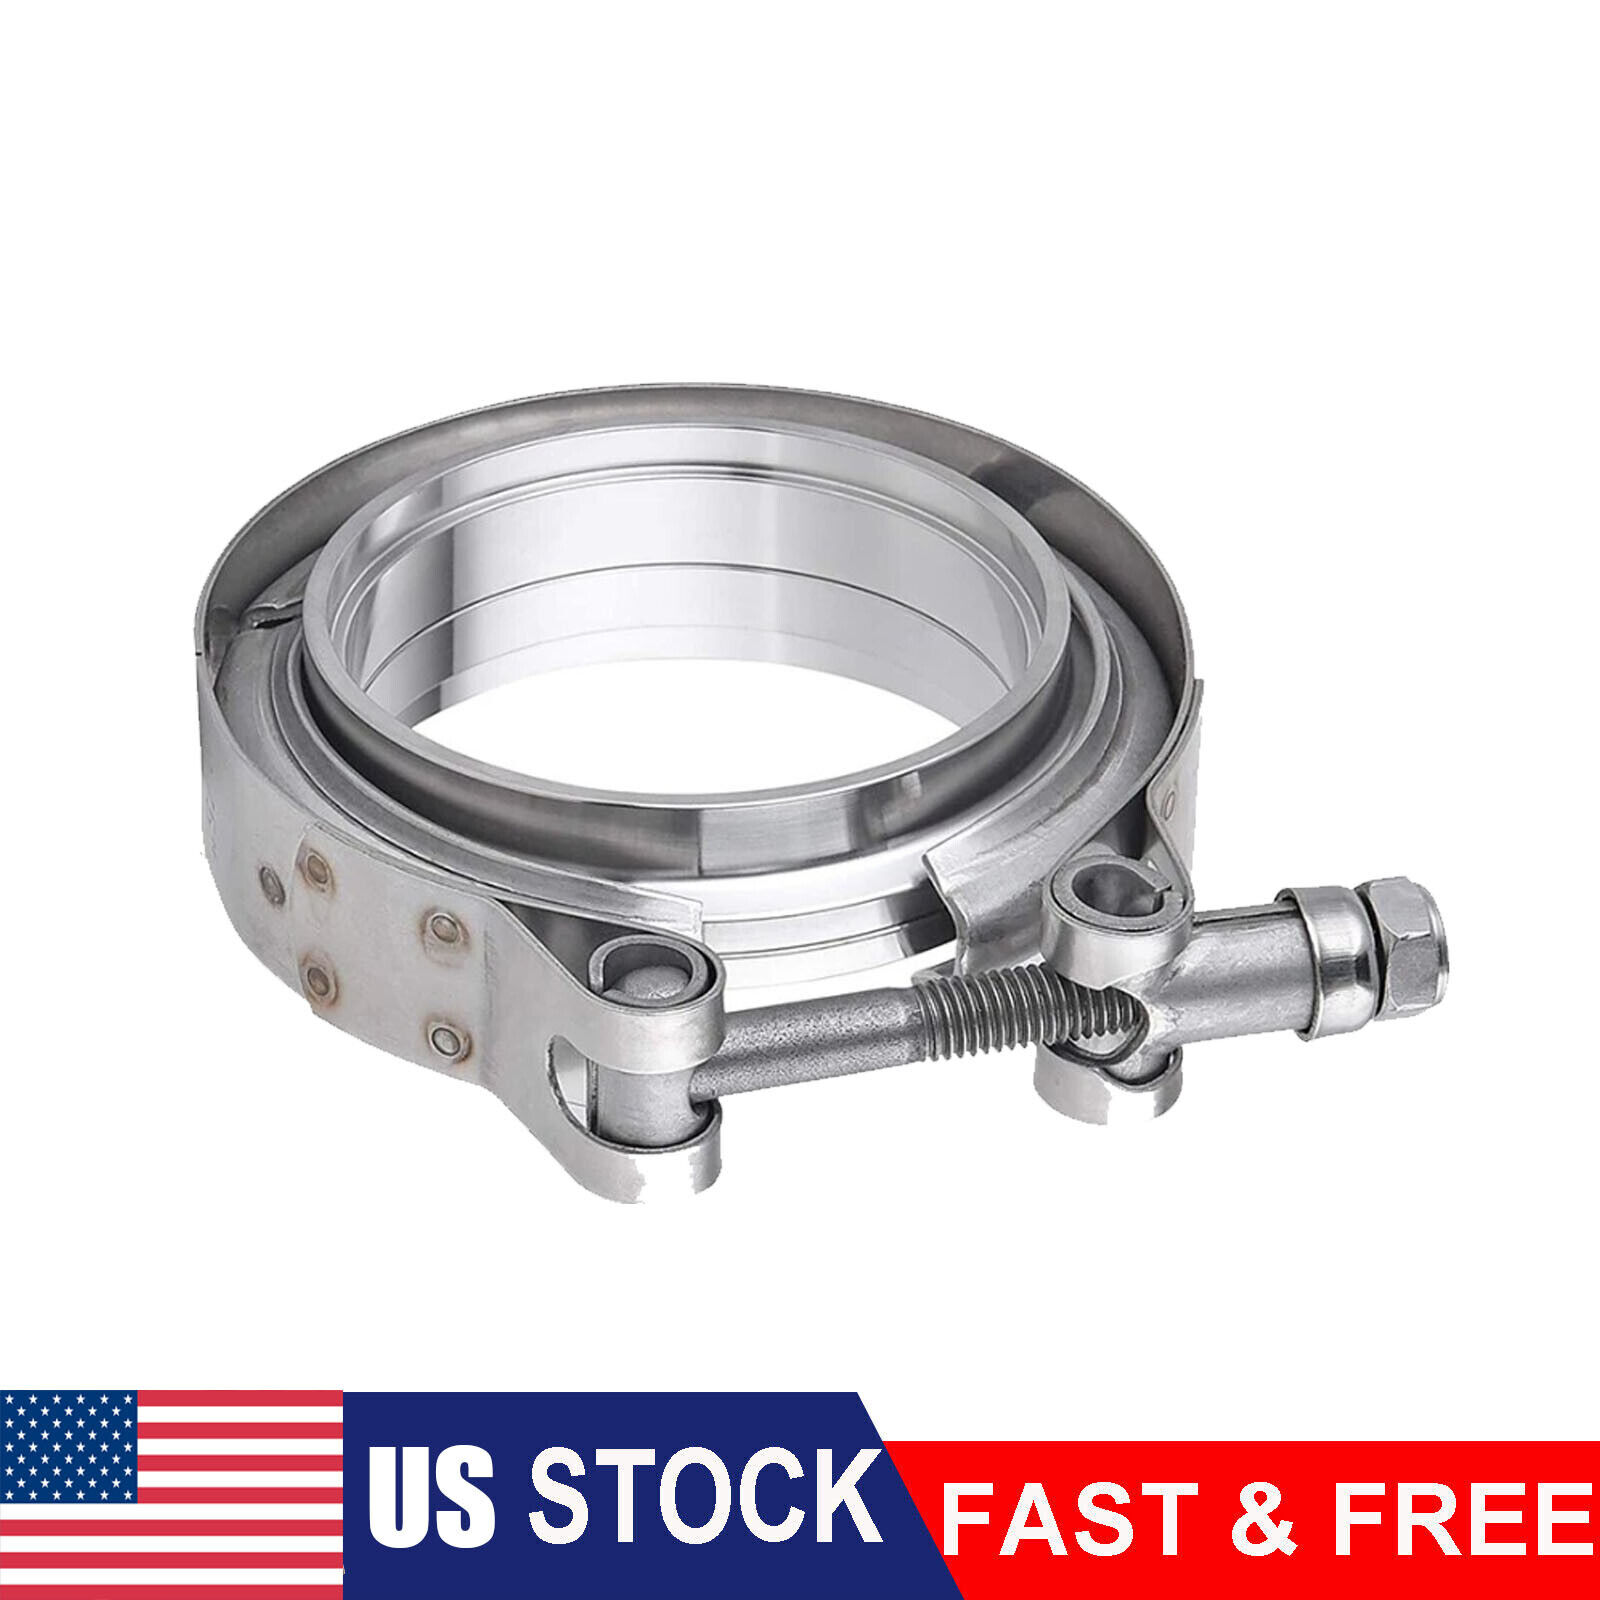 3 inch V-Band Clamp & 304 Stainless Steel flange kit Vband for Exhaust Downpipe